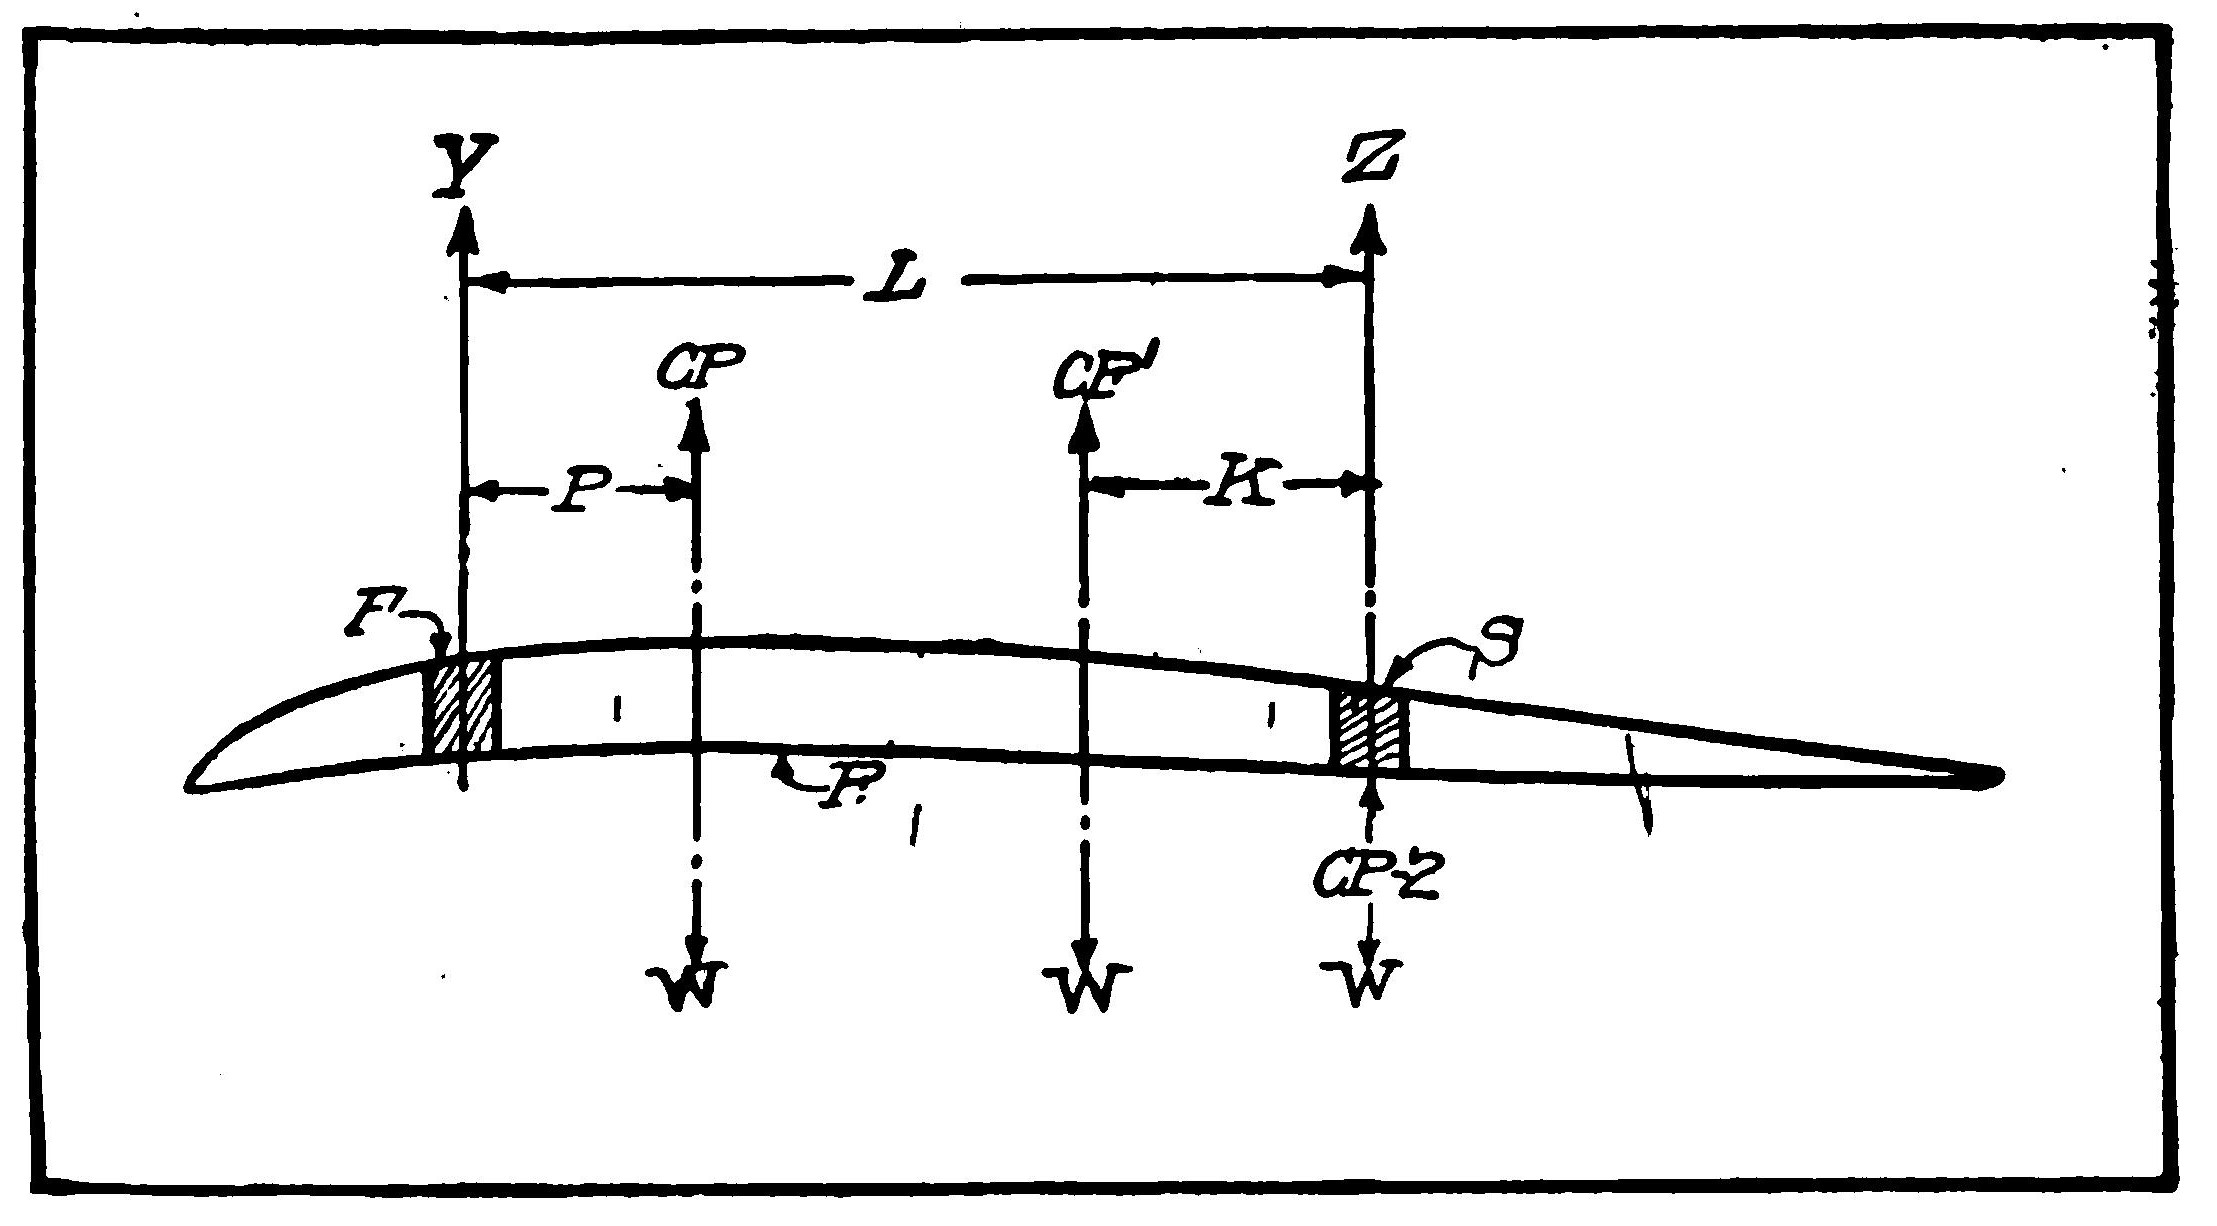 Fig. 4. Effects of C.P. Movement on Spar Loading